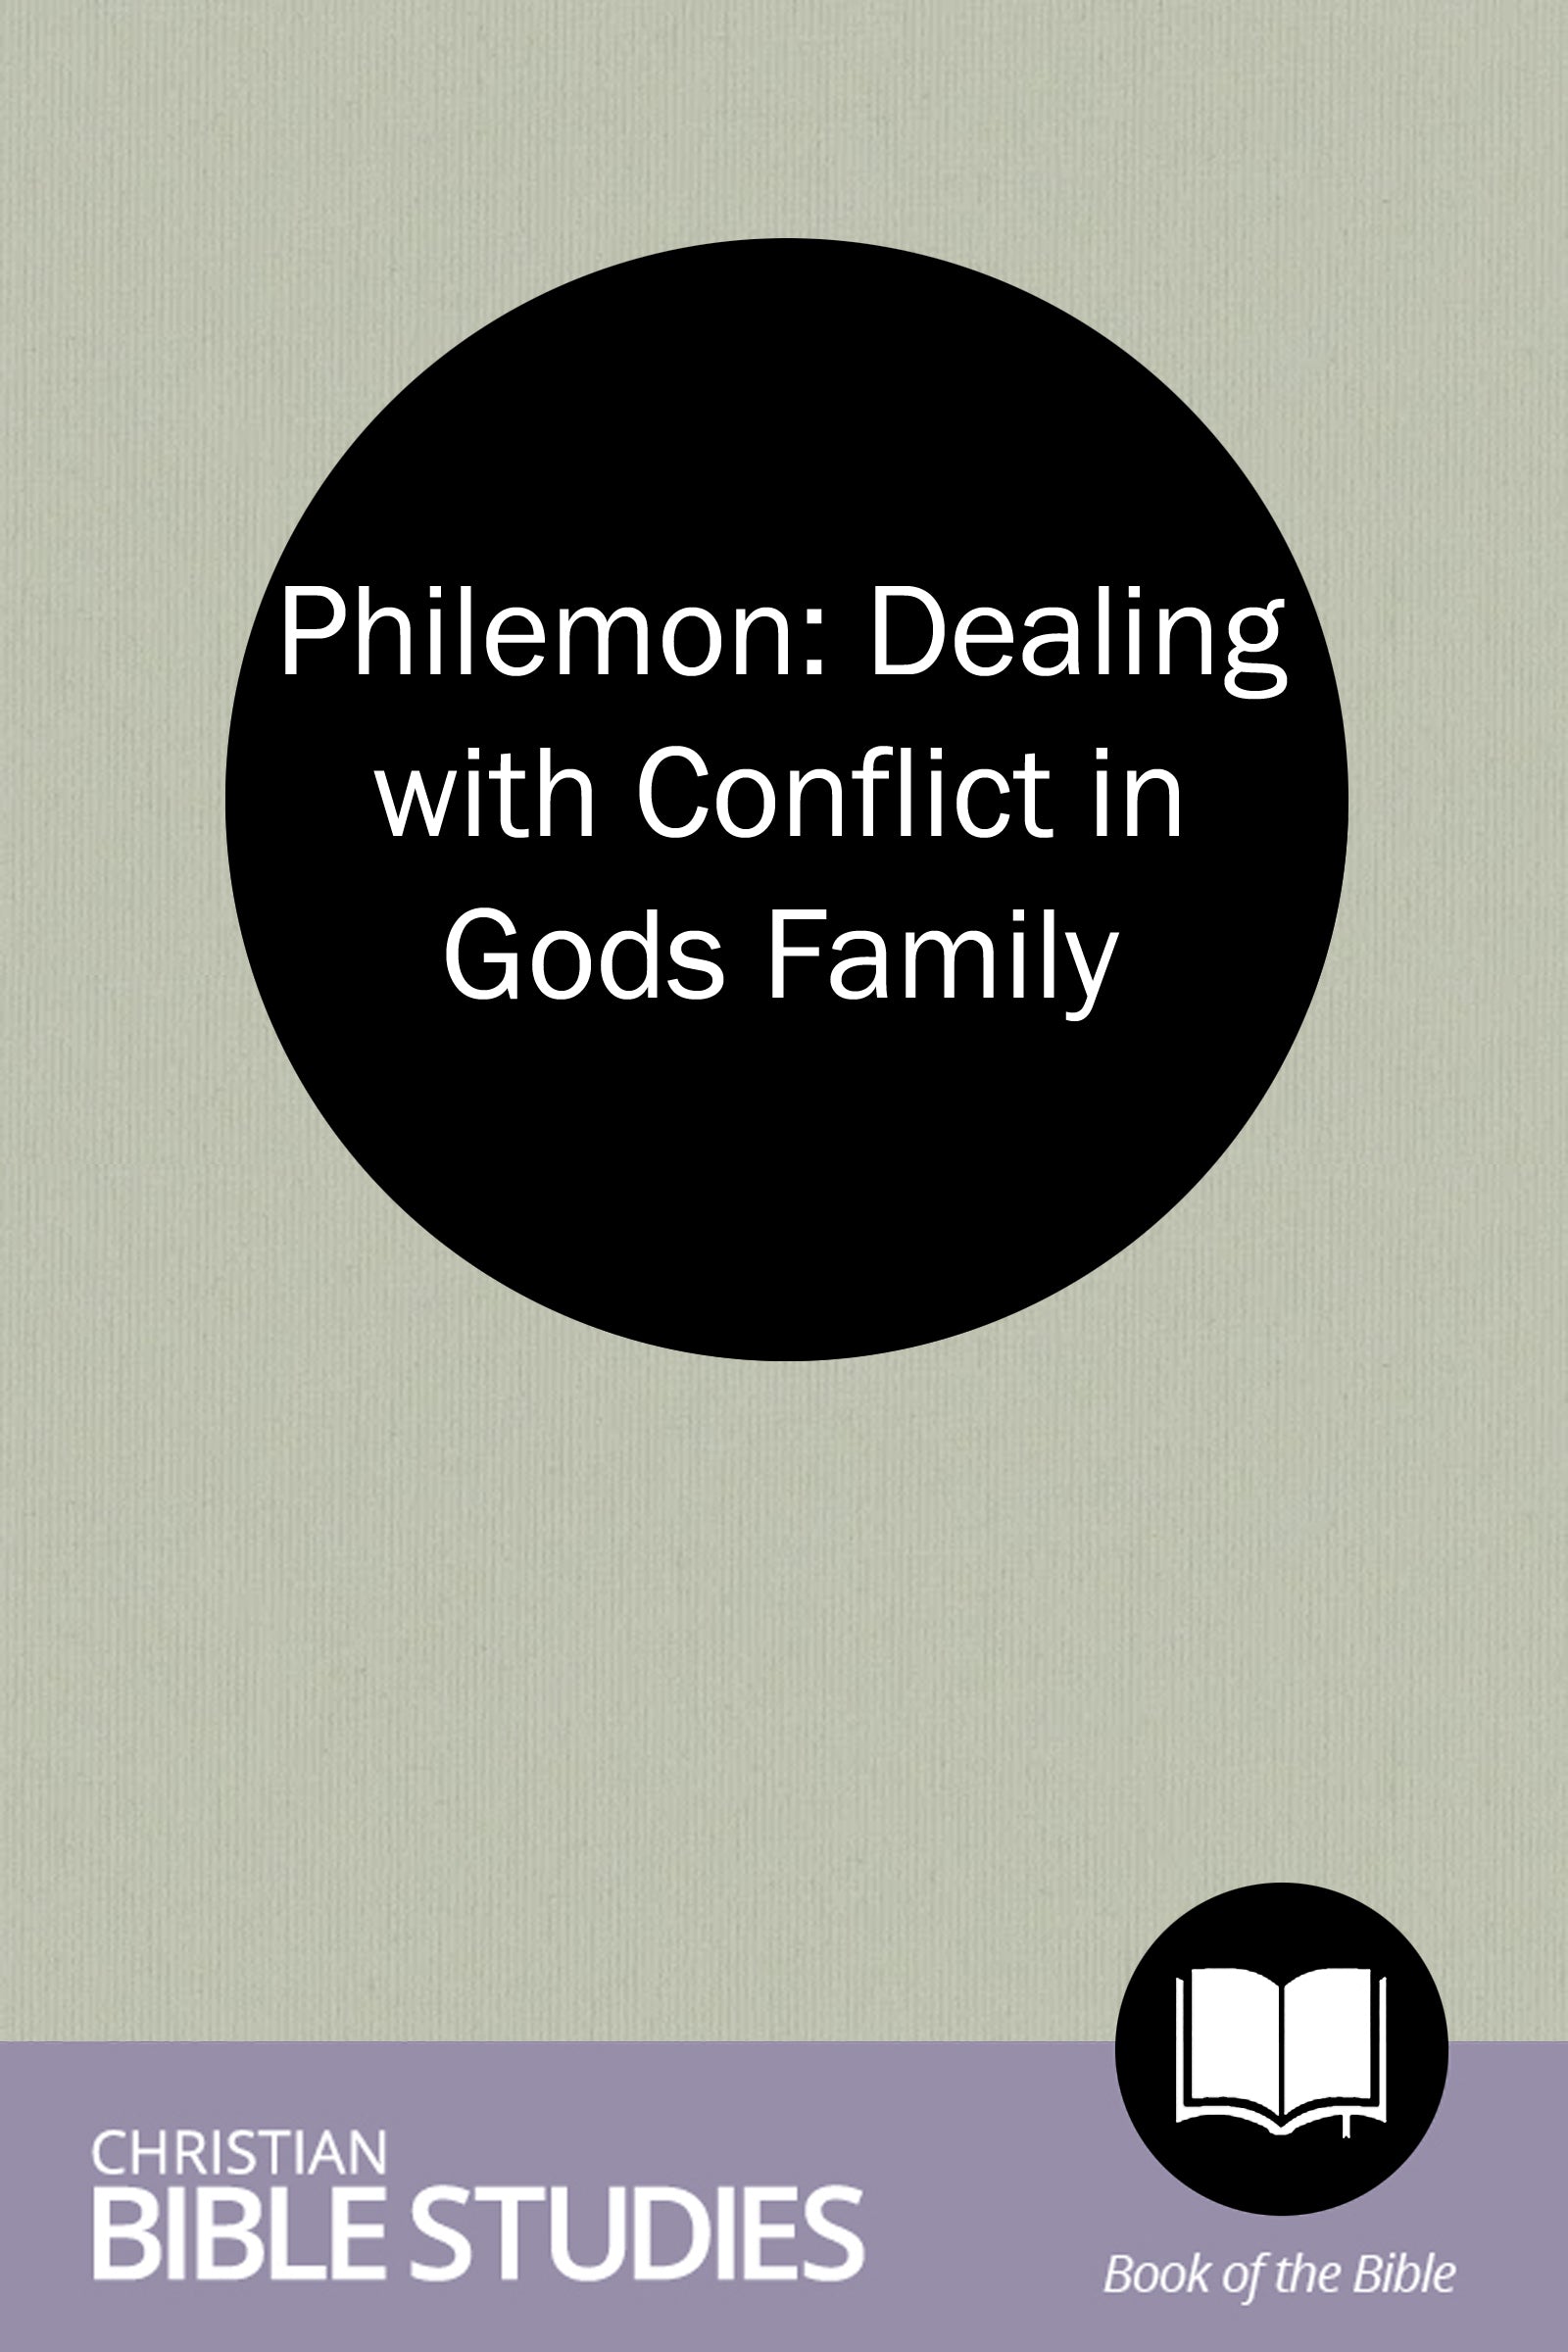 Philemon: Dealing with Conflict in God's Family